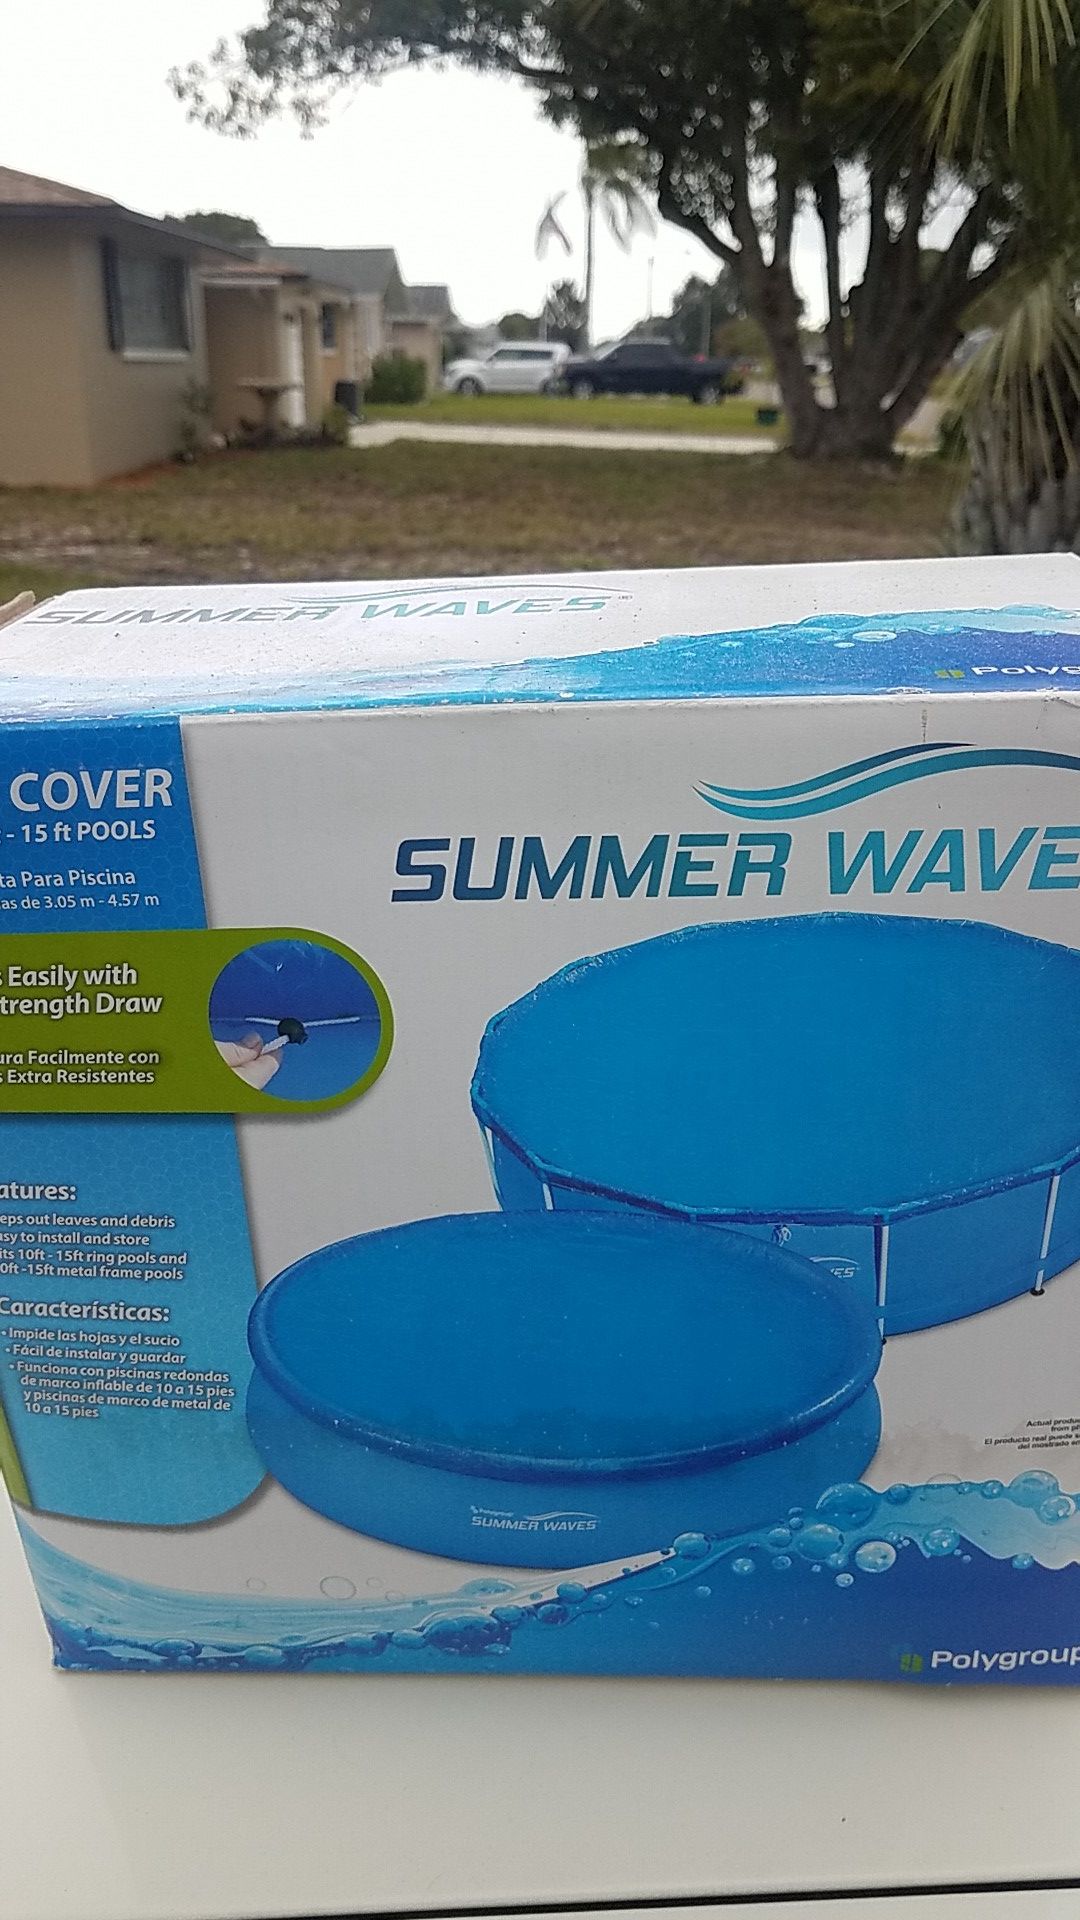 10-15ft pool cover